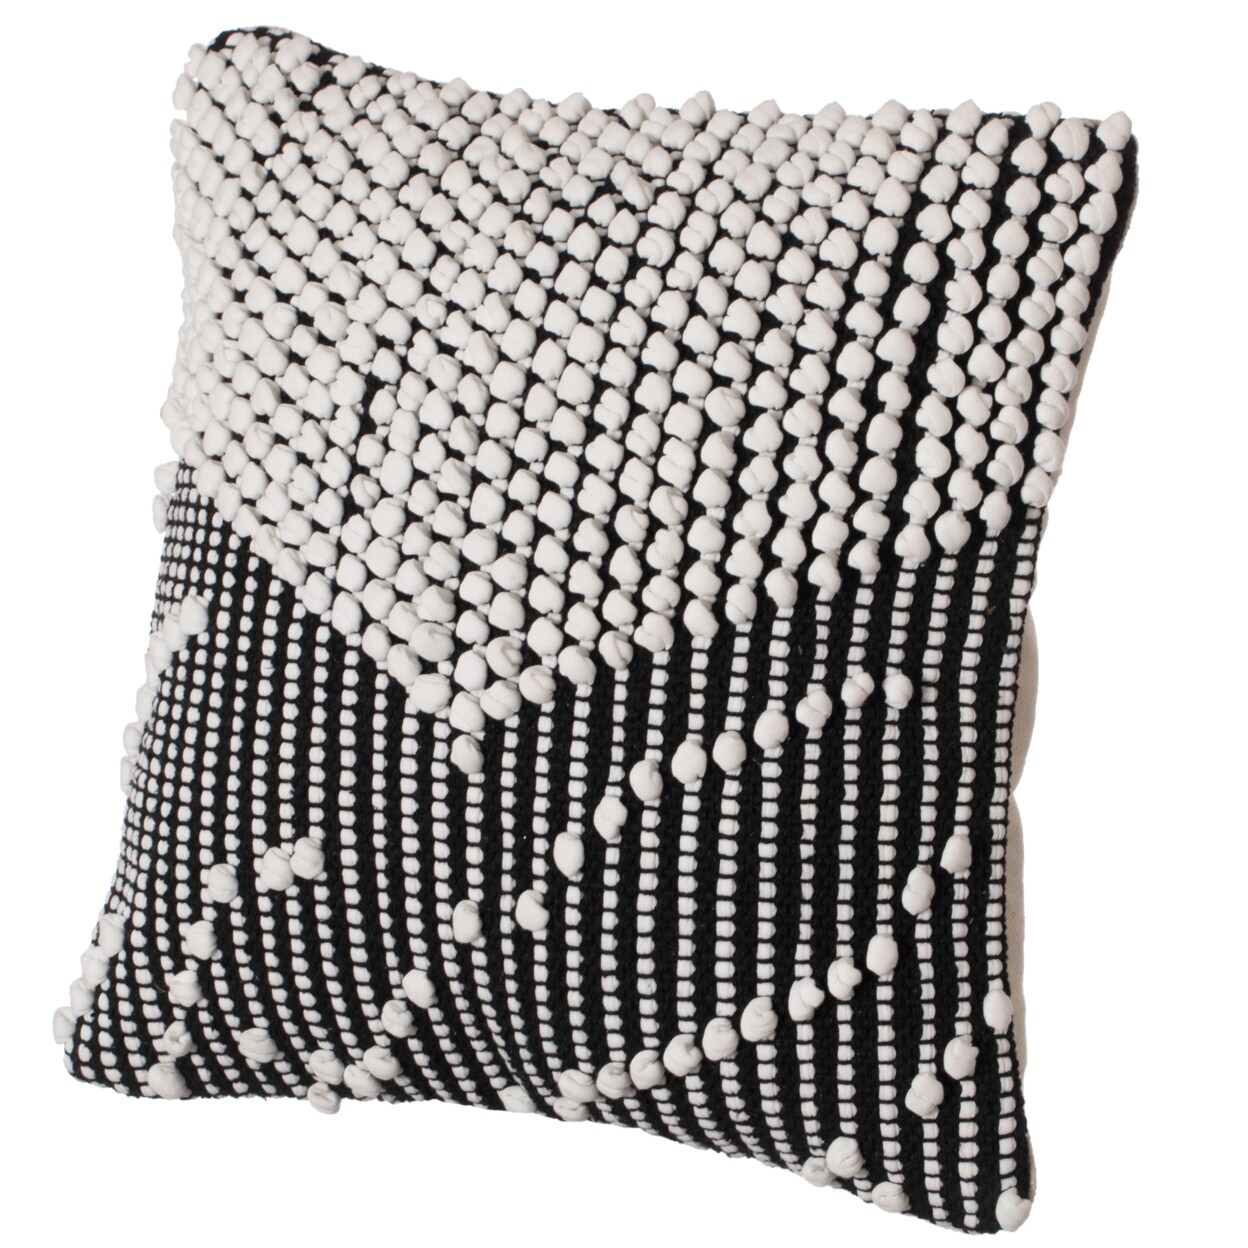 DEERLUX 16" Decorative Handwoven Cotton Throw Pillow Cover with Embossed Dots